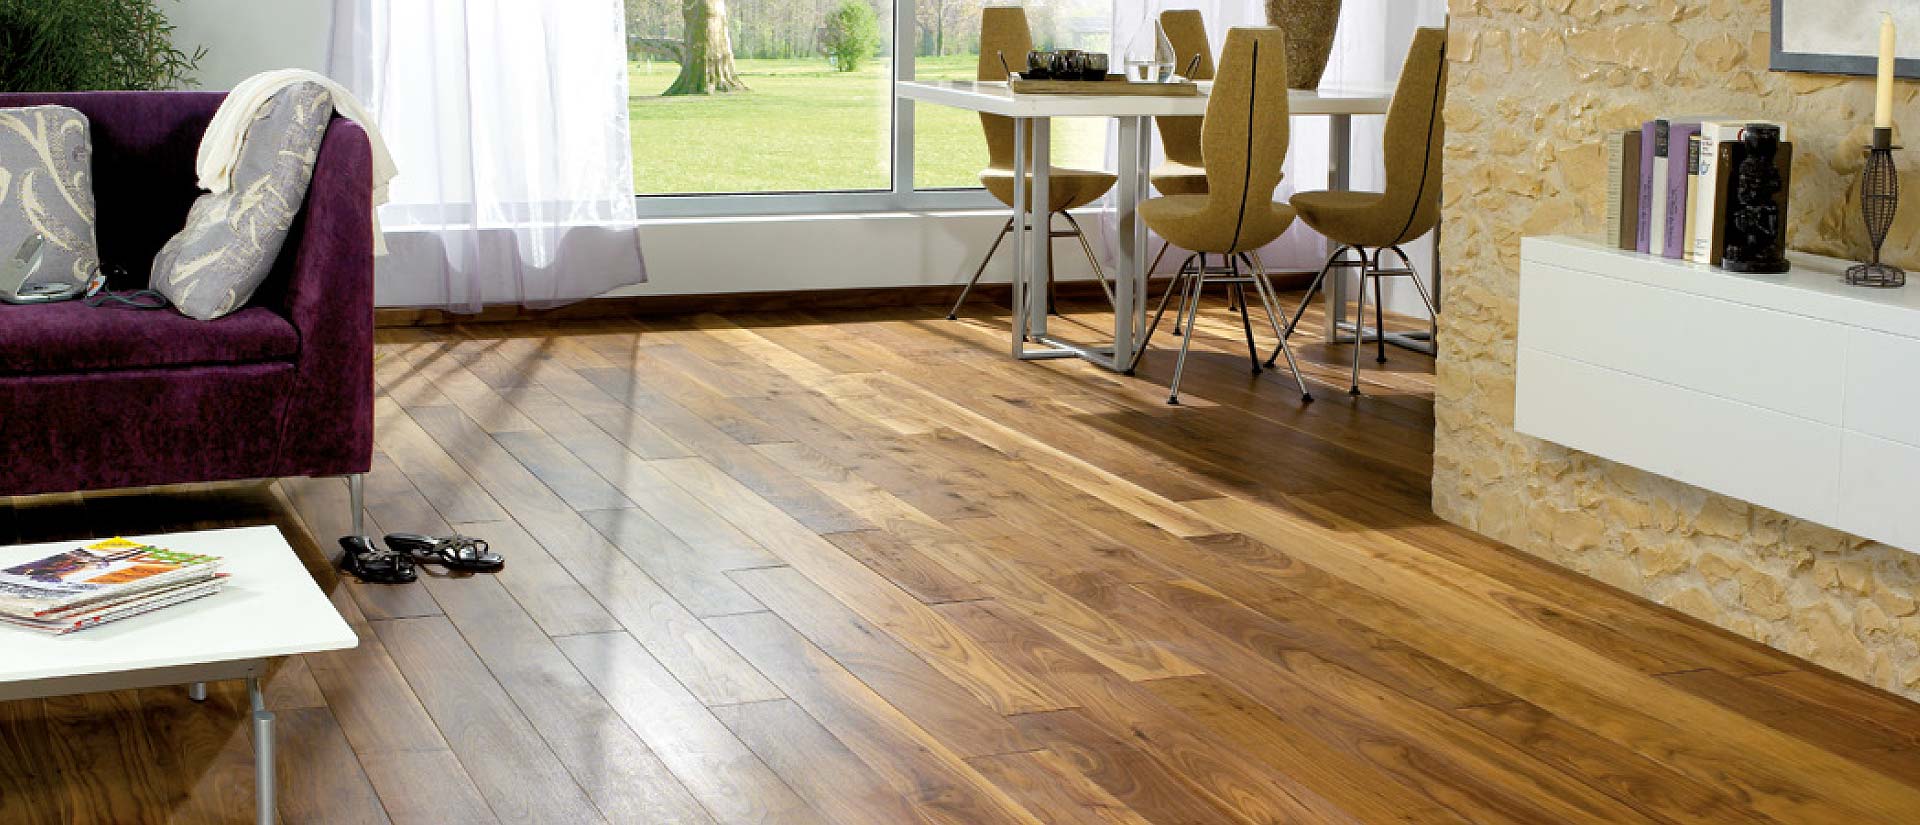 Walnut Wood Flooring finished with Osmo Polyx Oil Rapid